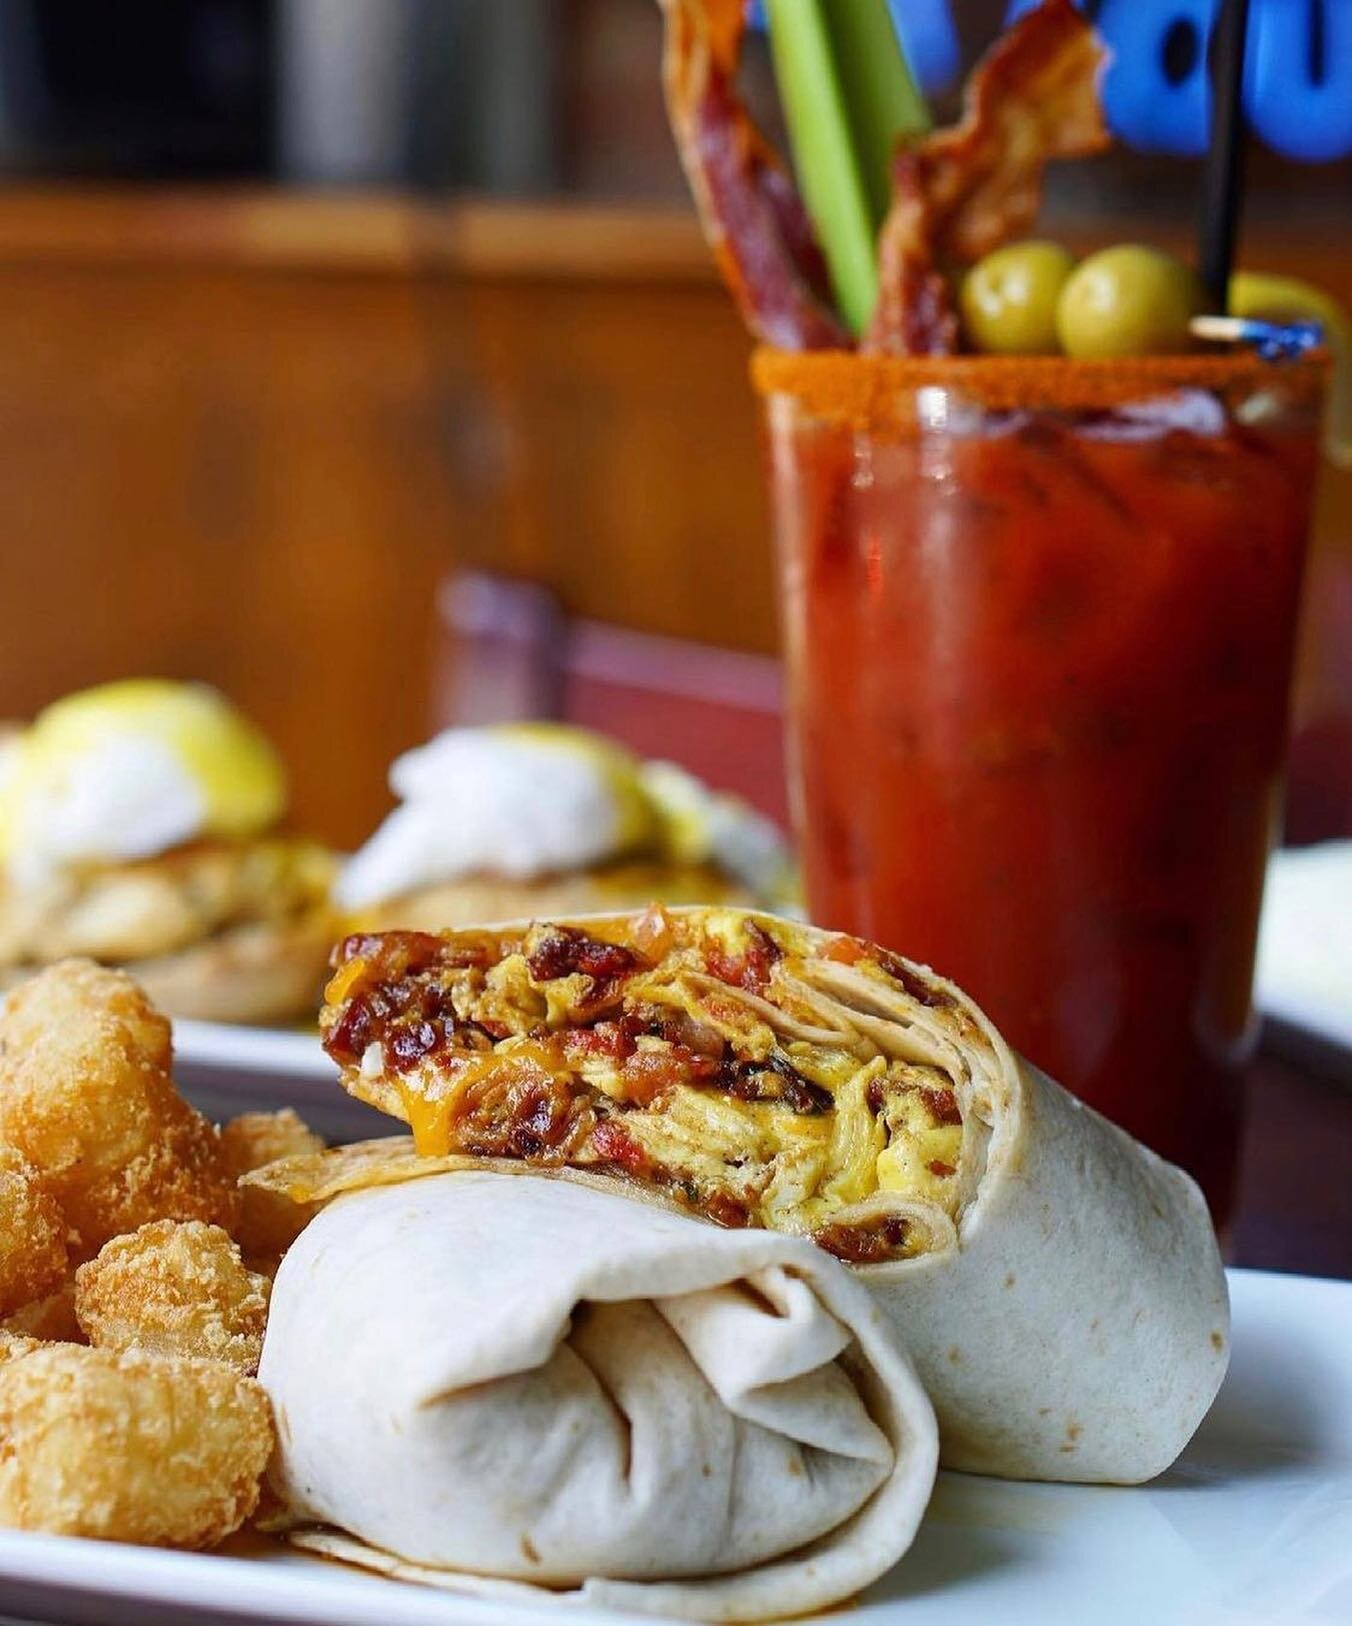 It&rsquo;s brunchin&rsquo; time!!! We&rsquo;ve got bloody marys, mimosas, and some of the best breakfast burritos in Fed Hill! Come get your Saturday morning started at DK! 🌯🍳🔥